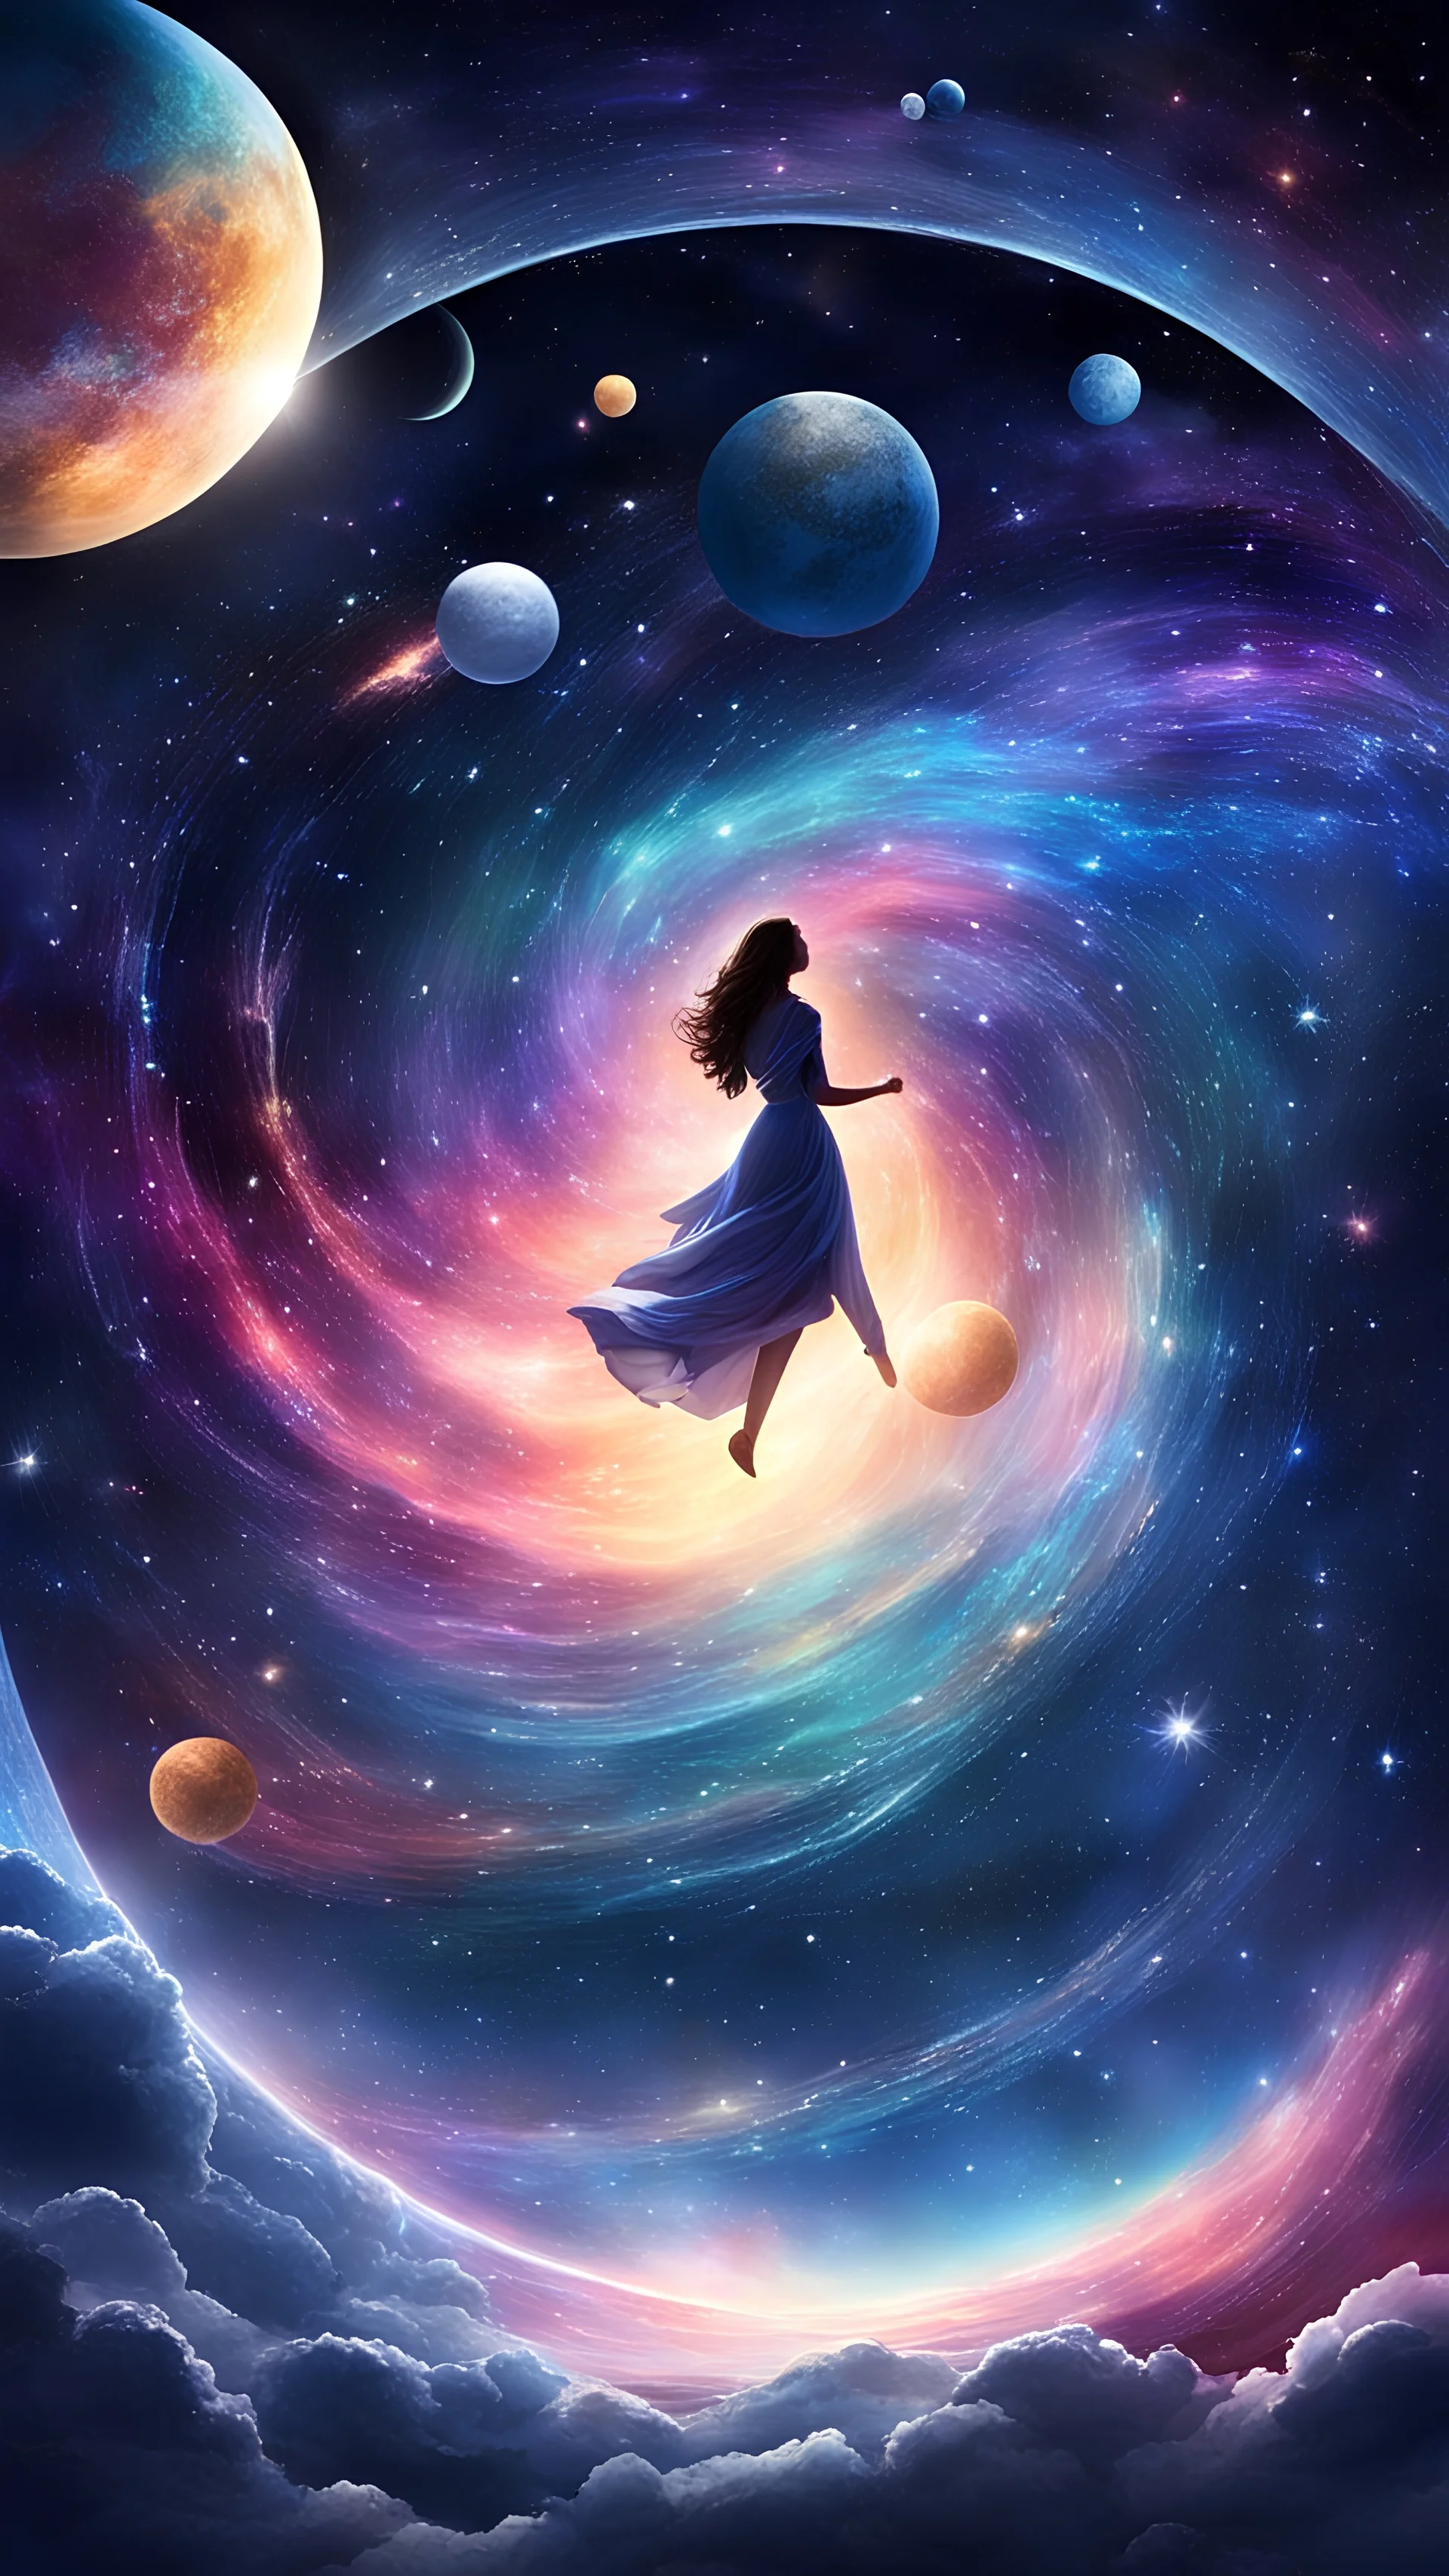 Create an ethereal scene where a couple floats in the vastness of space, surrounded by celestial bodies. Show their love as a cosmic force that binds them together across the universe